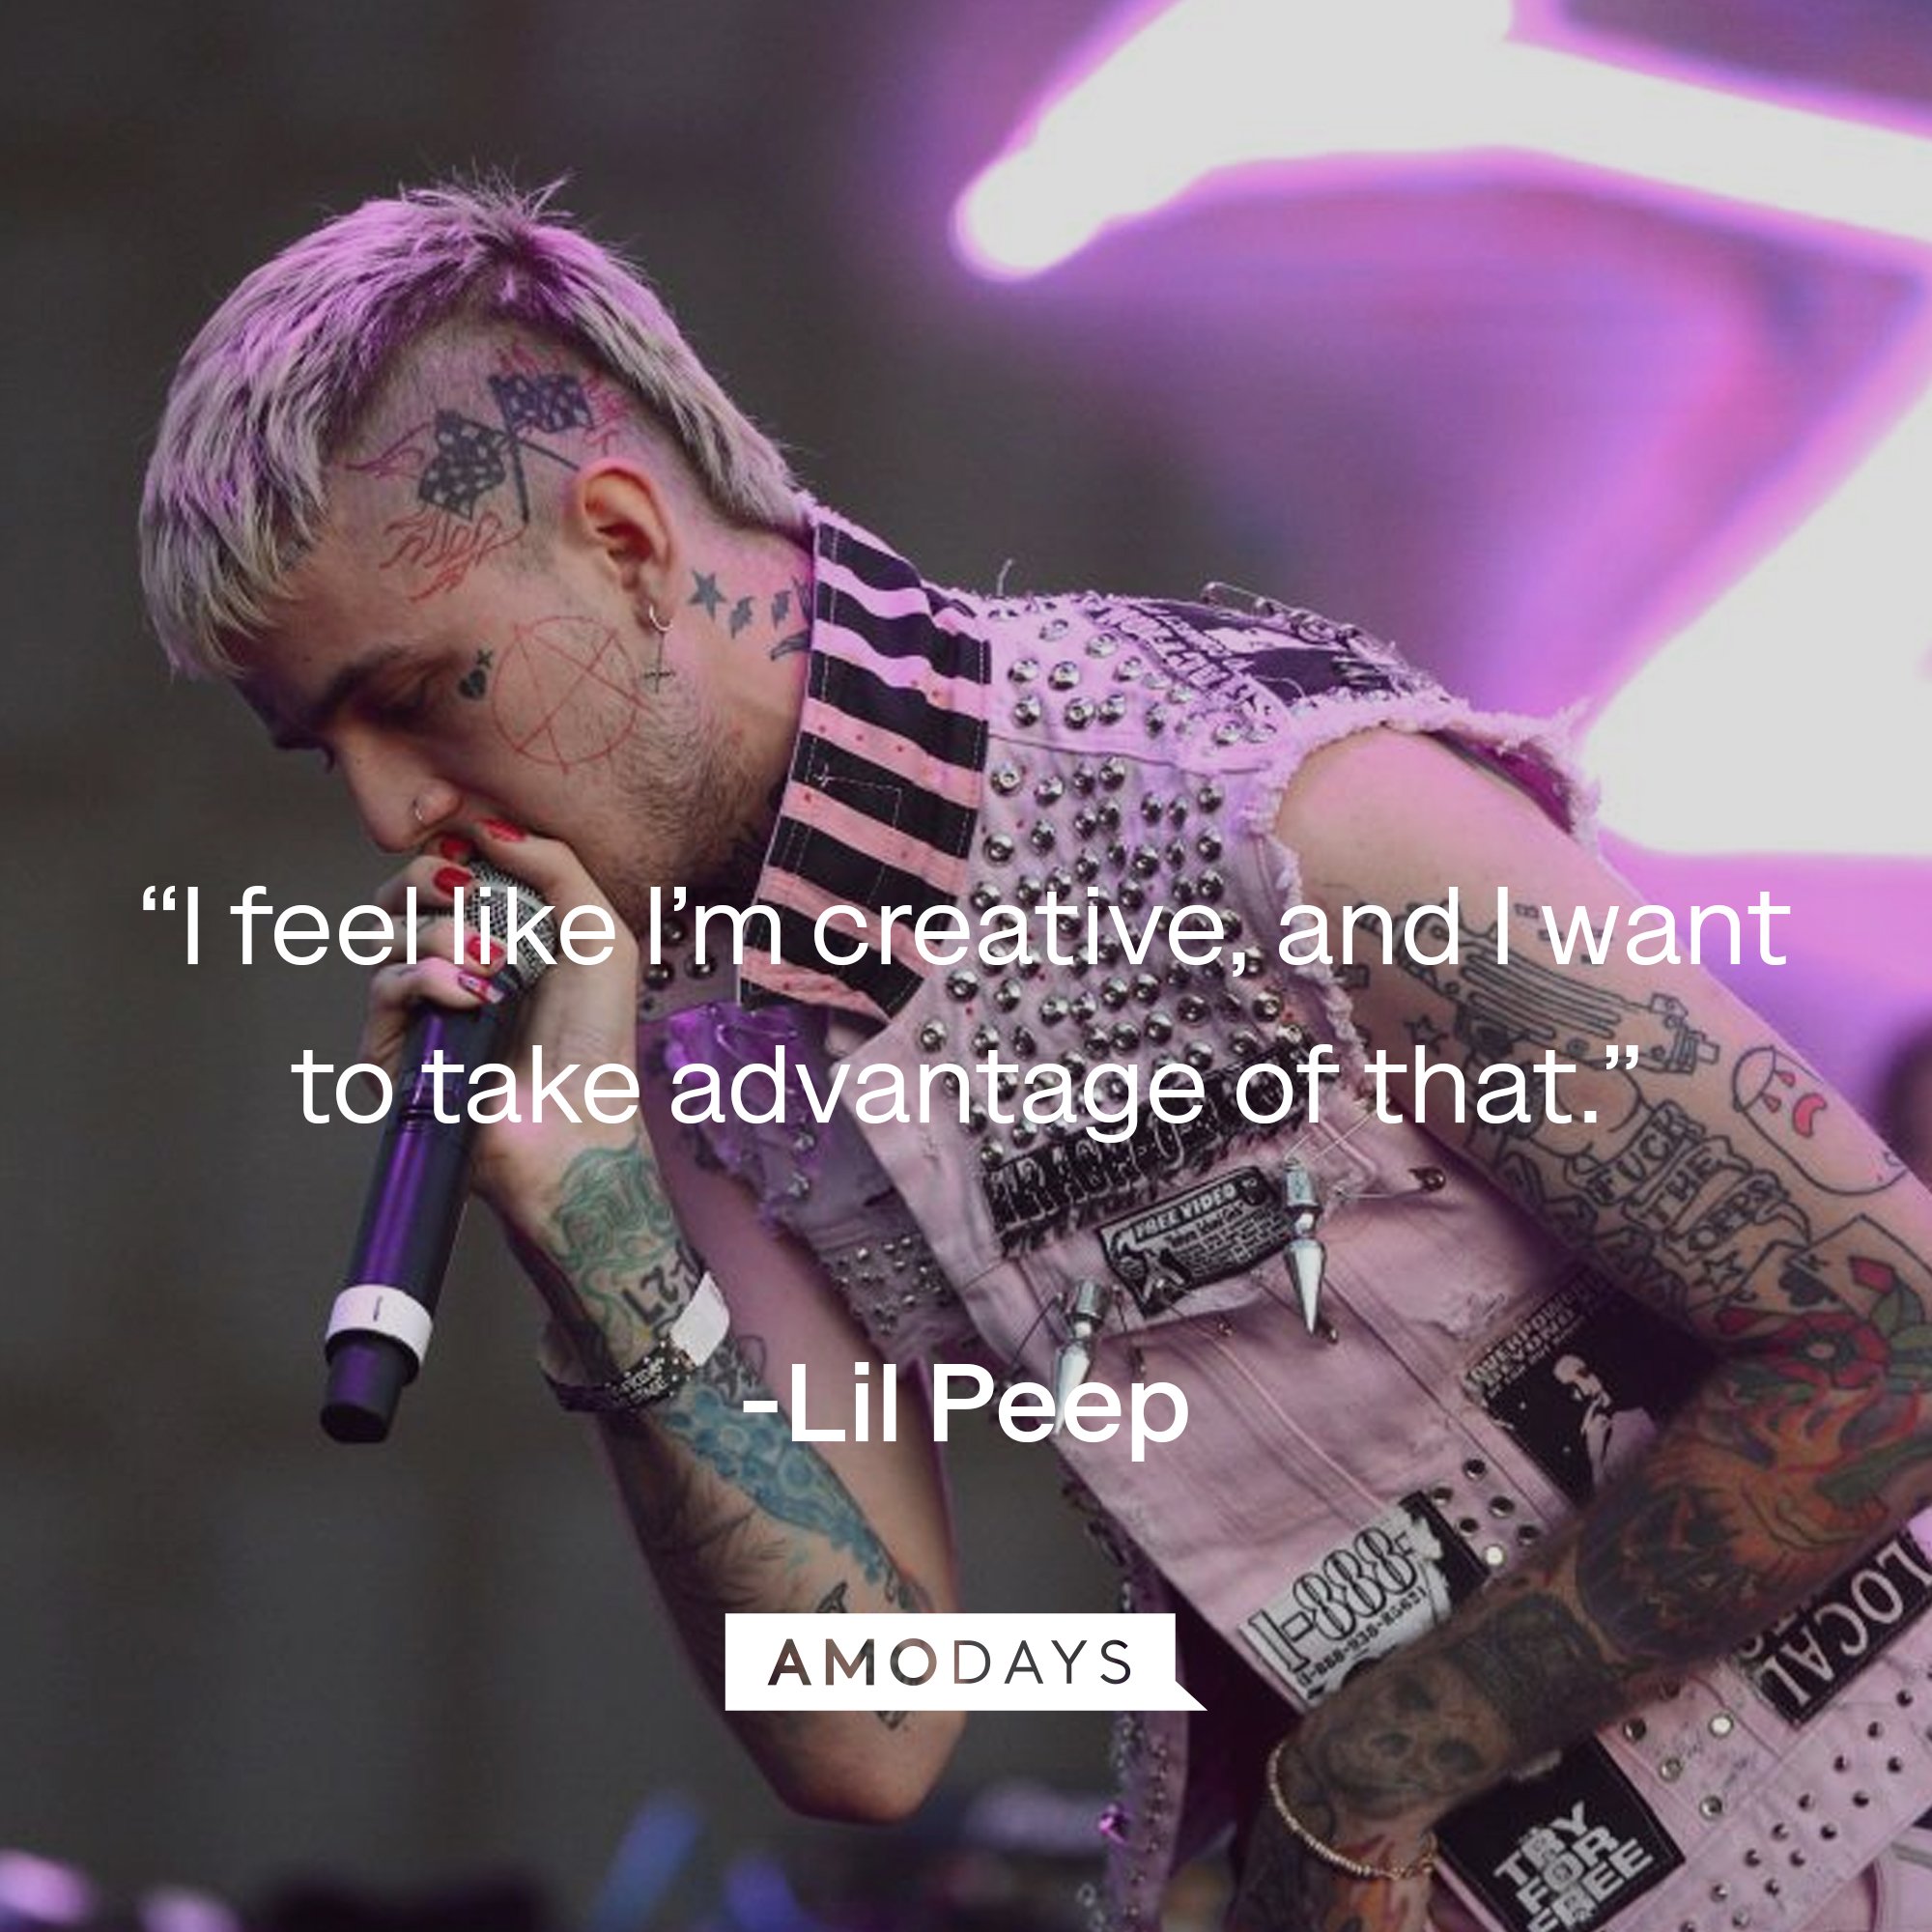 Lil Peep's quote: “I feel like I’m creative, and I want to take advantage of that.” | Image: AmoDays